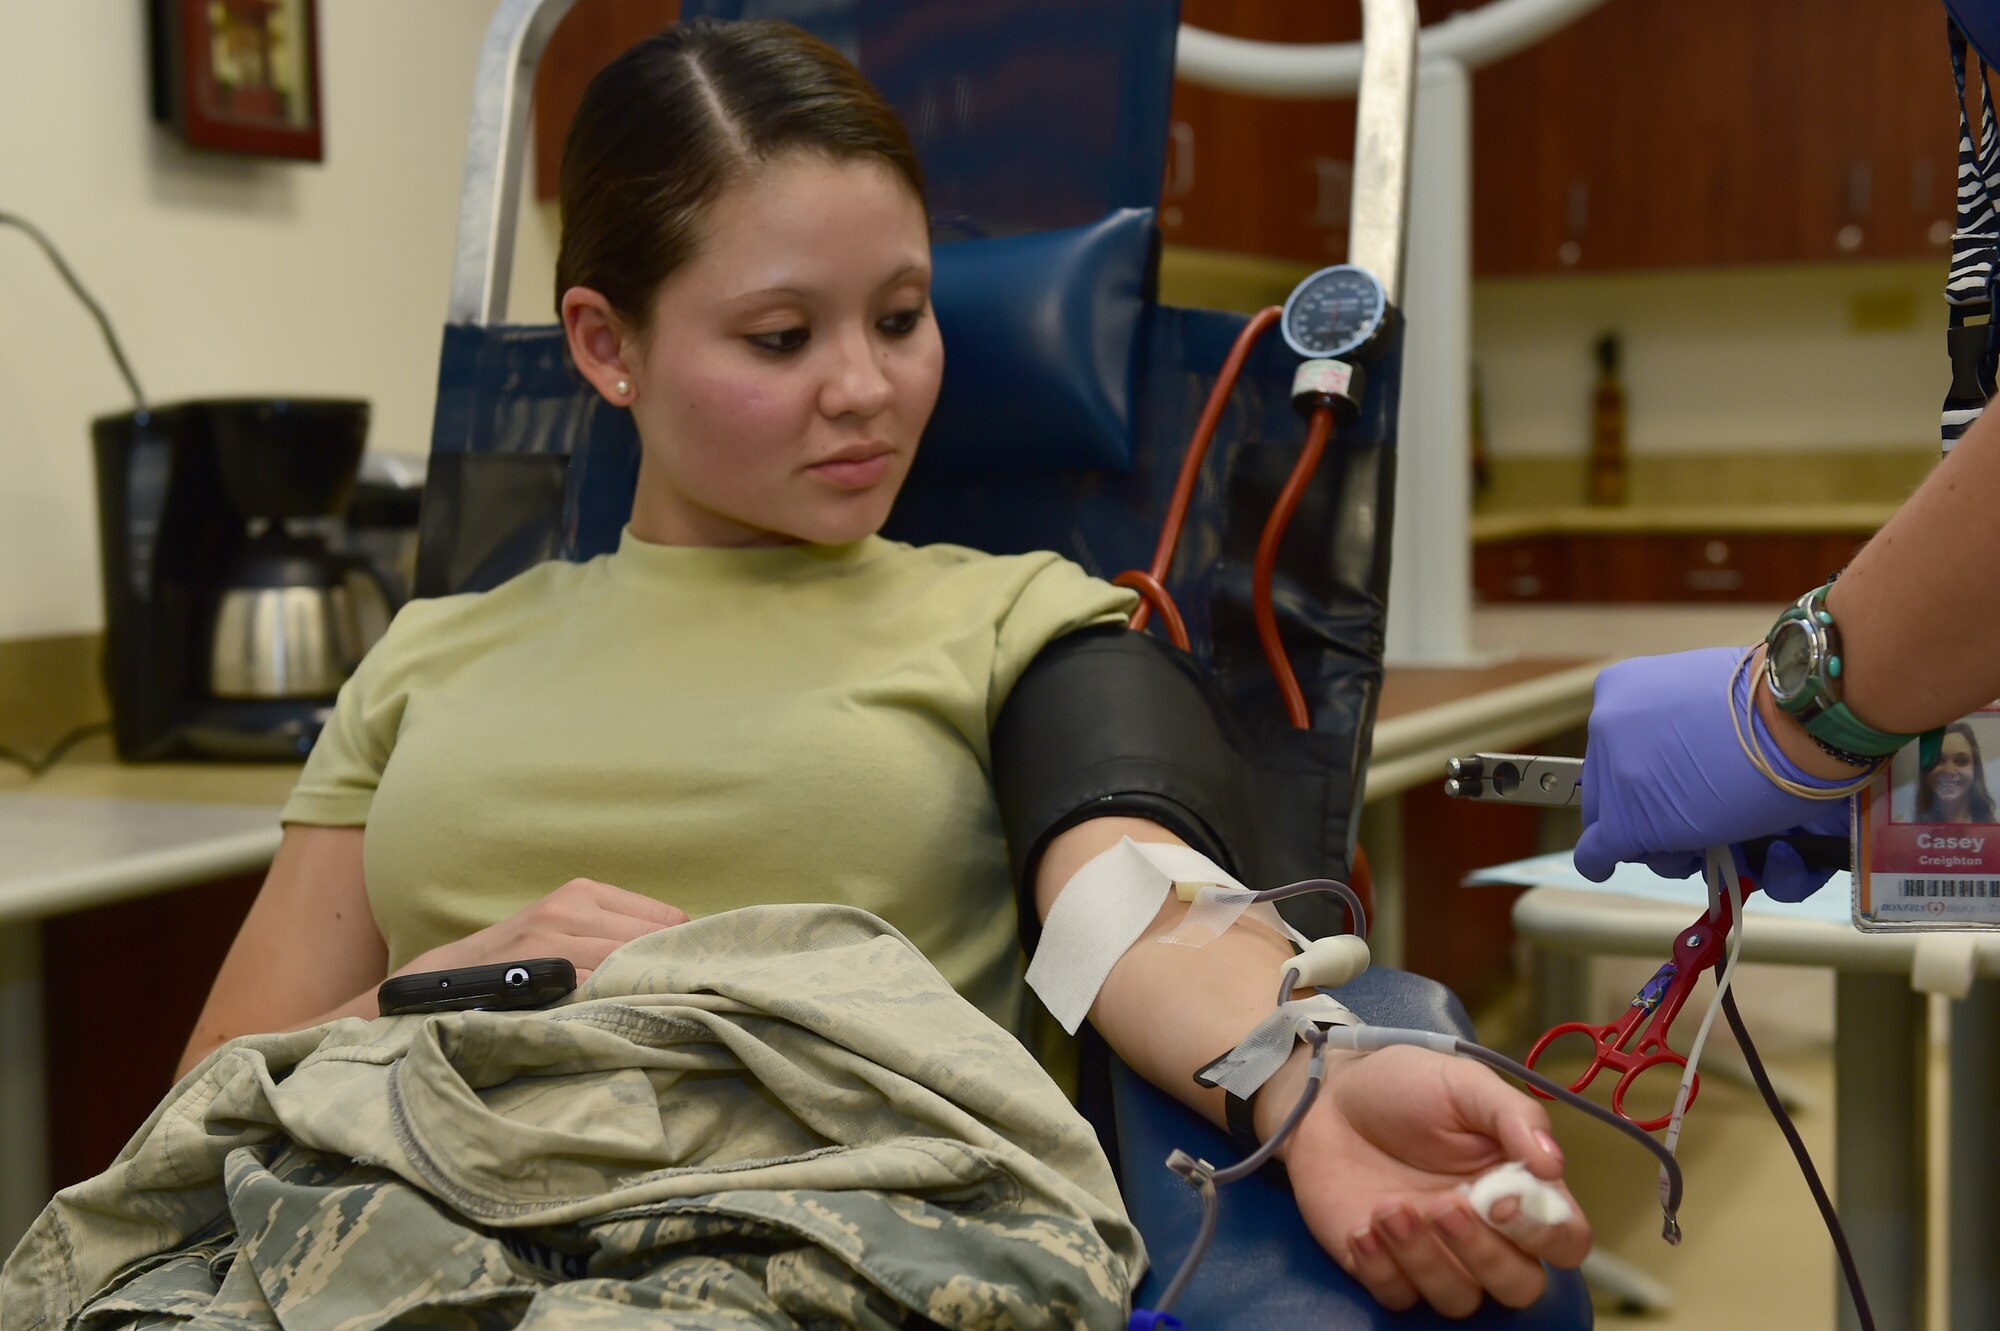 Airman 1st Class Cinthya Solorzano, 460th Space Wing 2nd Space Warning Squadron space operator, donates blood at the Health and Wellness Center during a blood drive hosted by Bonfils Blood Center Sept. 2, 2015, on Buckley Air Force Base, Colo. Team Buckley members participated in the drive to donate and raise awareness towards the donation of blood for those in need. (U.S. Air Force photo by Airman 1st Class Luke W. Nowakowski/Released)